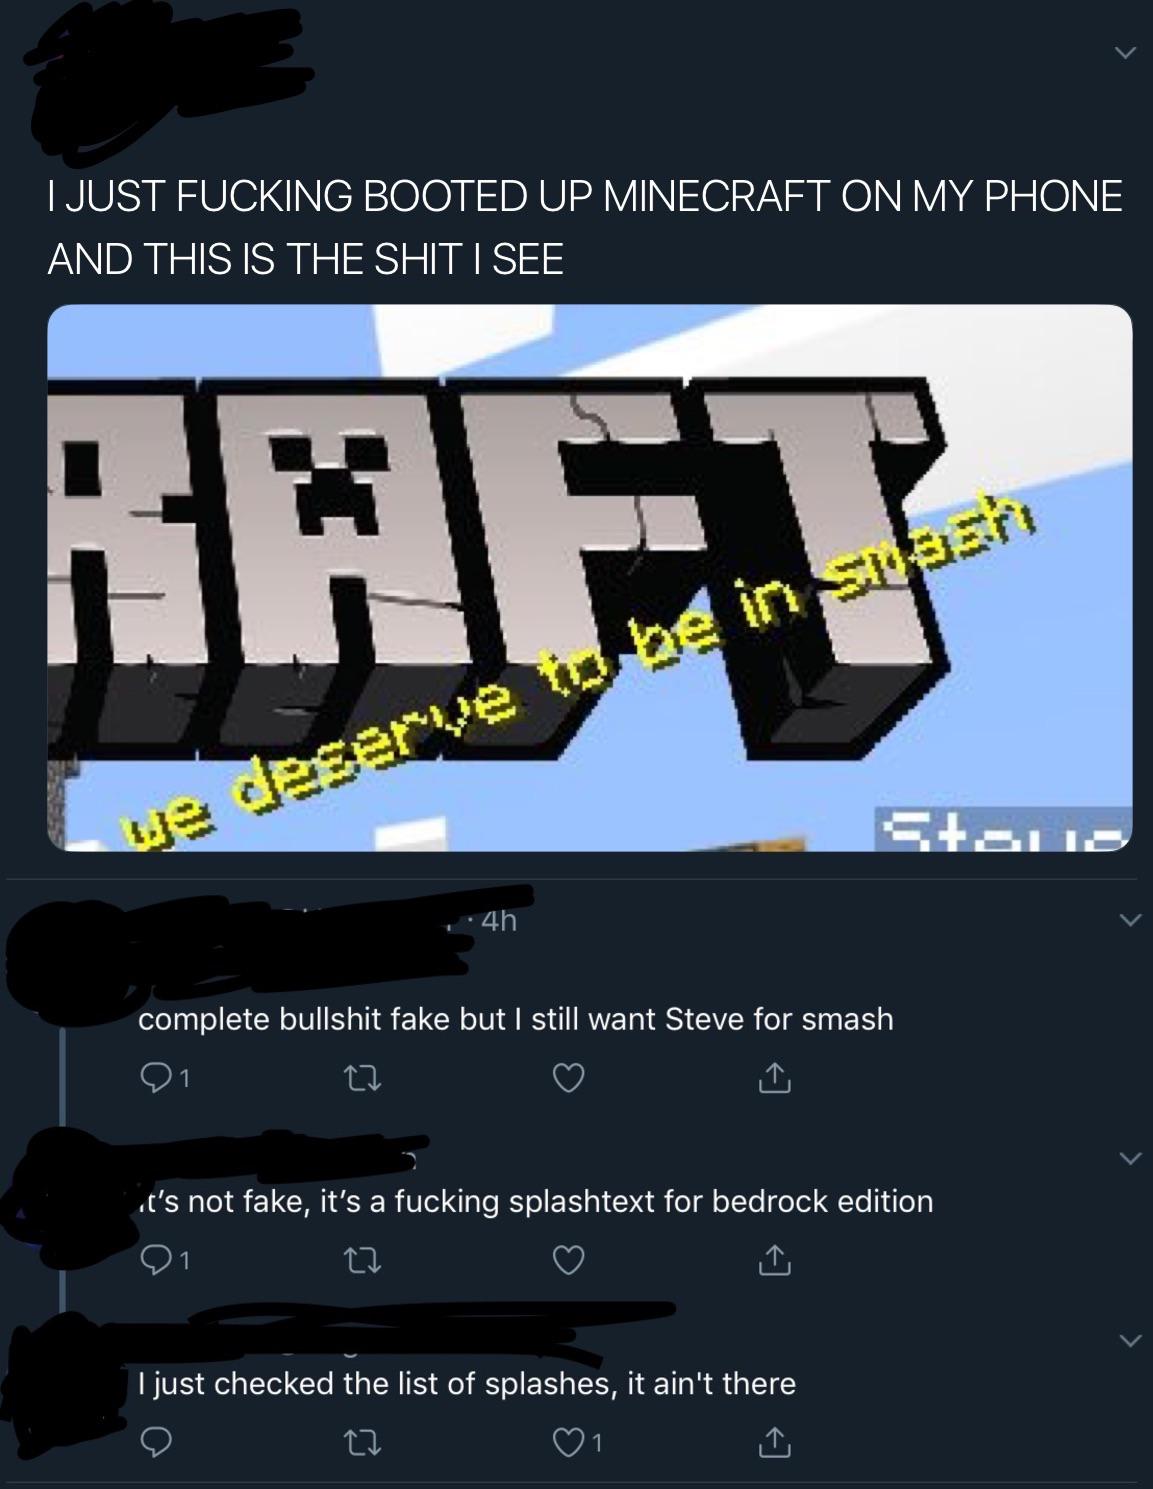 screenshot - I Just Fucking Booted Up Minecraft On My Phone And This Is The Shit I See Raft Susid 4h complete bullshit fake but I still want Steve for smash 21 22 it's not fake, it's a fucking splashtext for bedrock edition 21 22 I just checked the list o